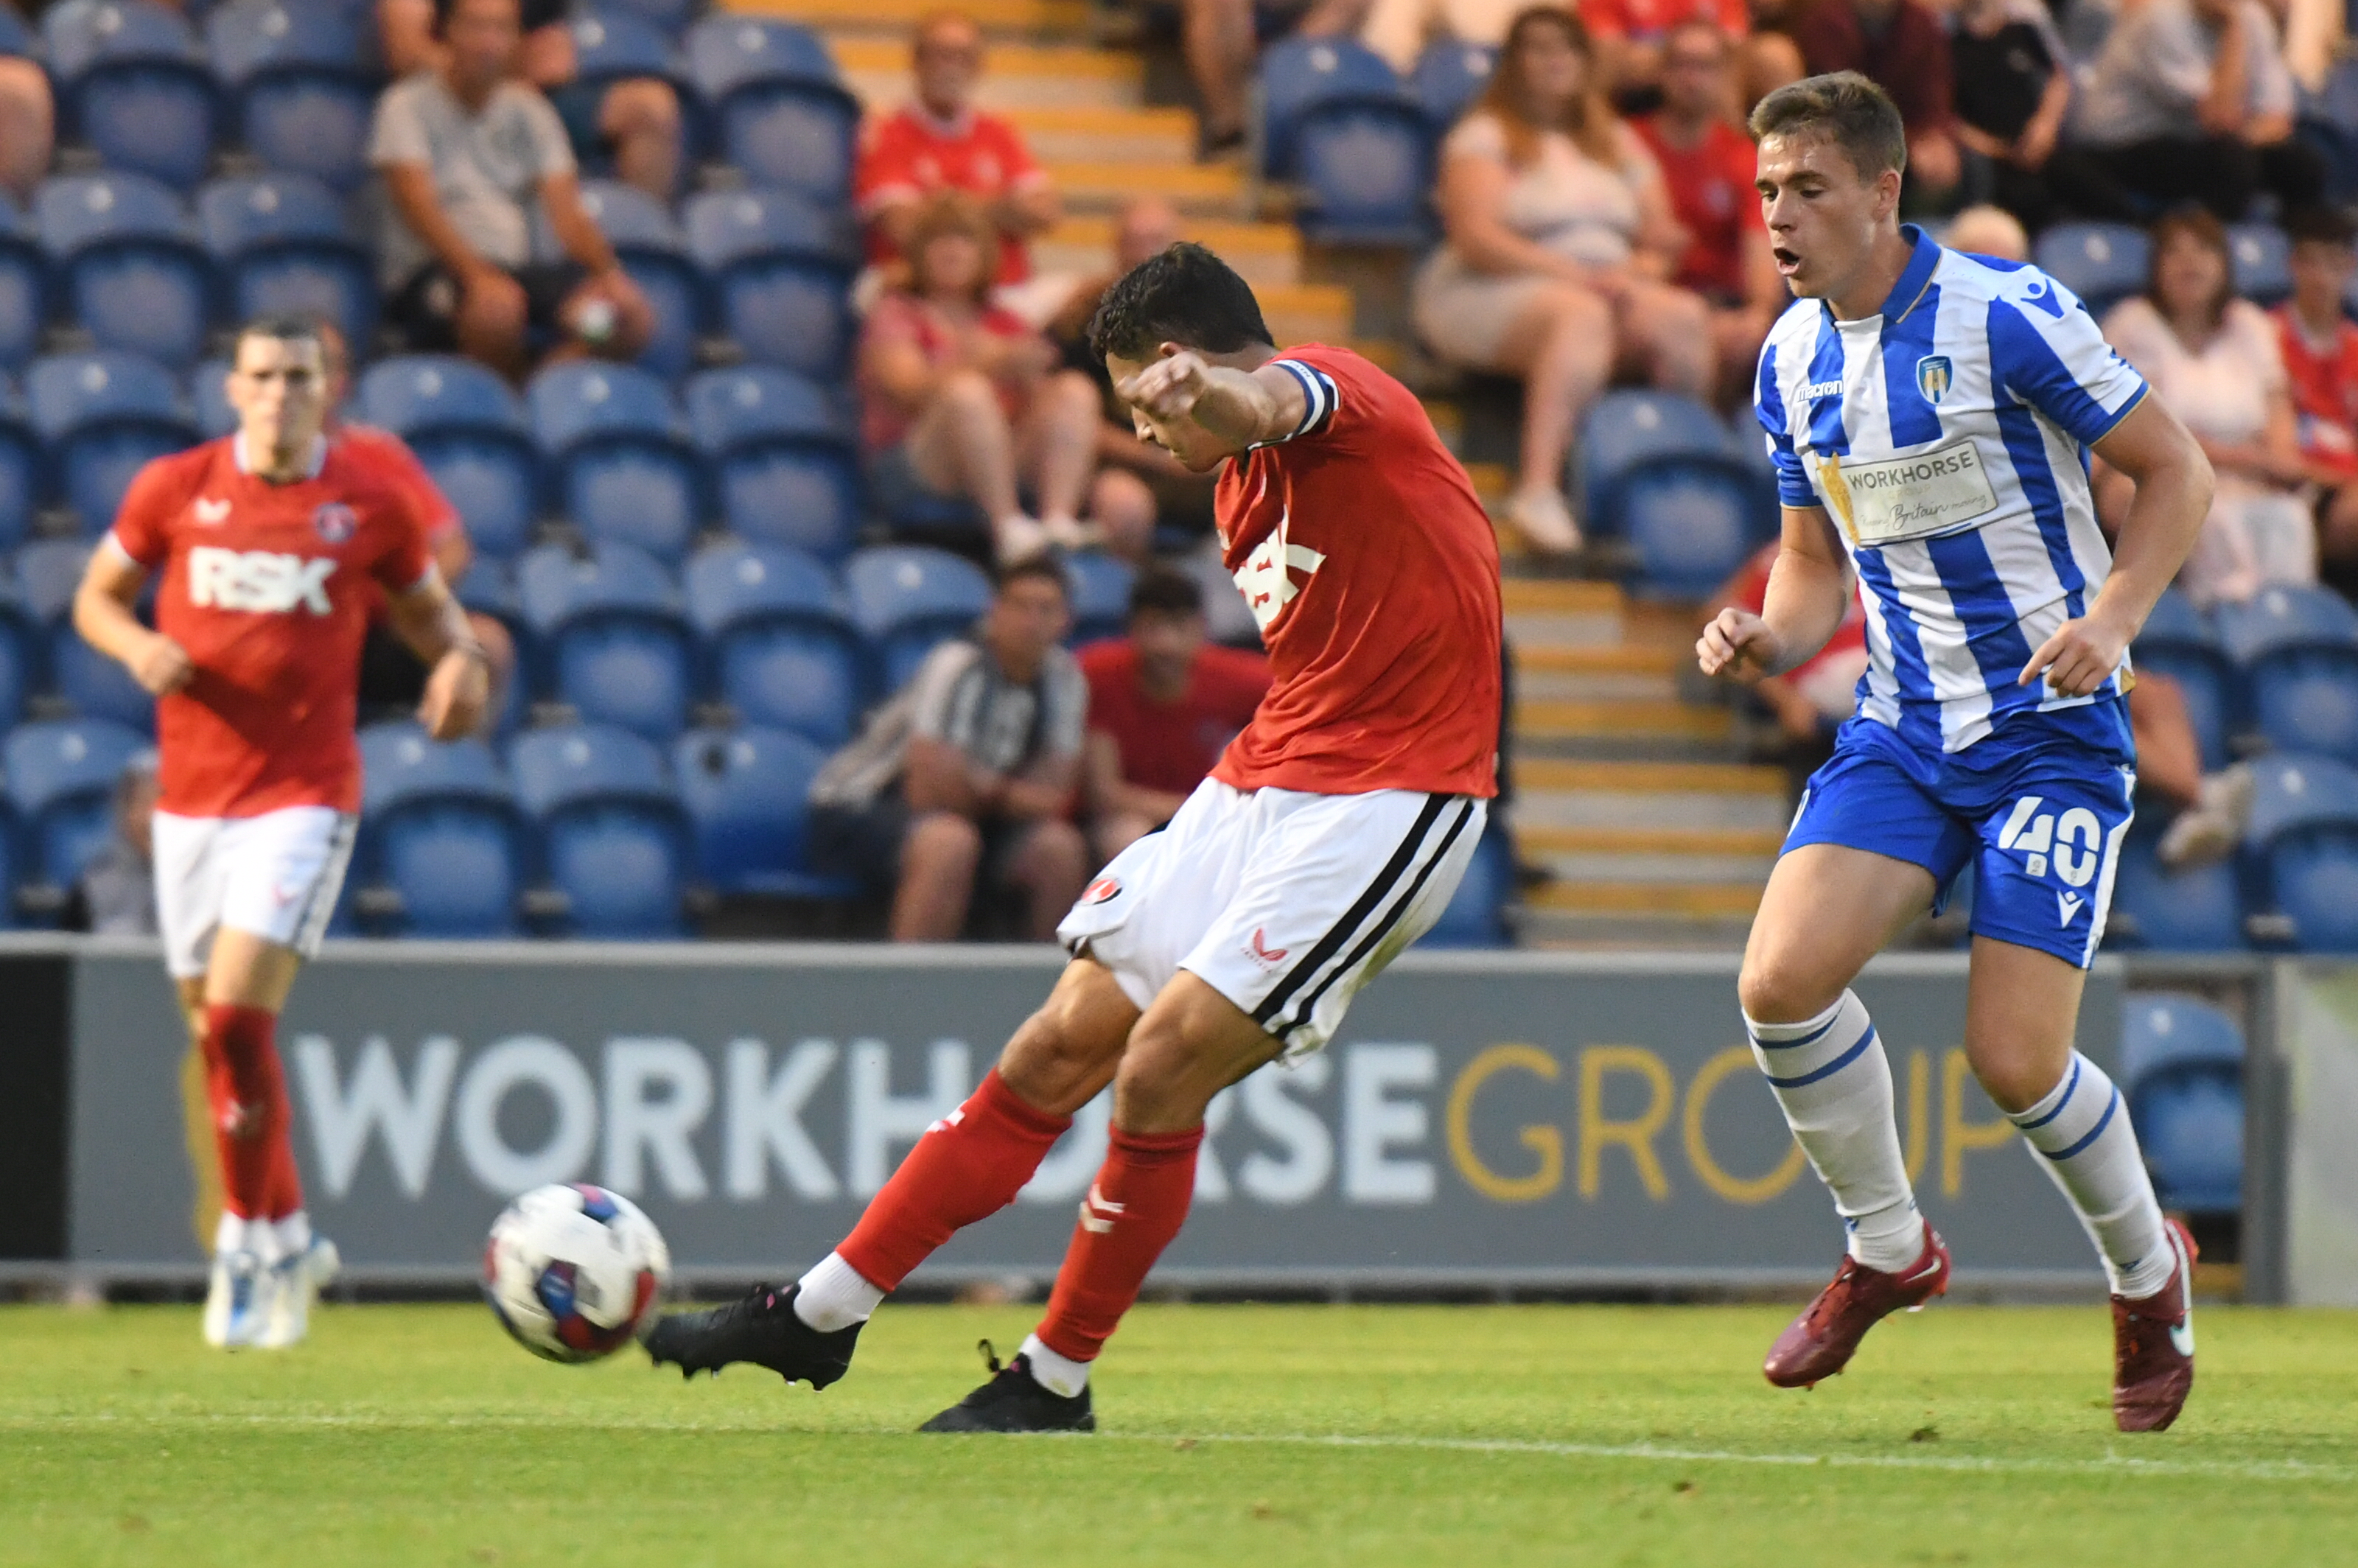 Albie Morgan scores a thunderous goal at Colchester United